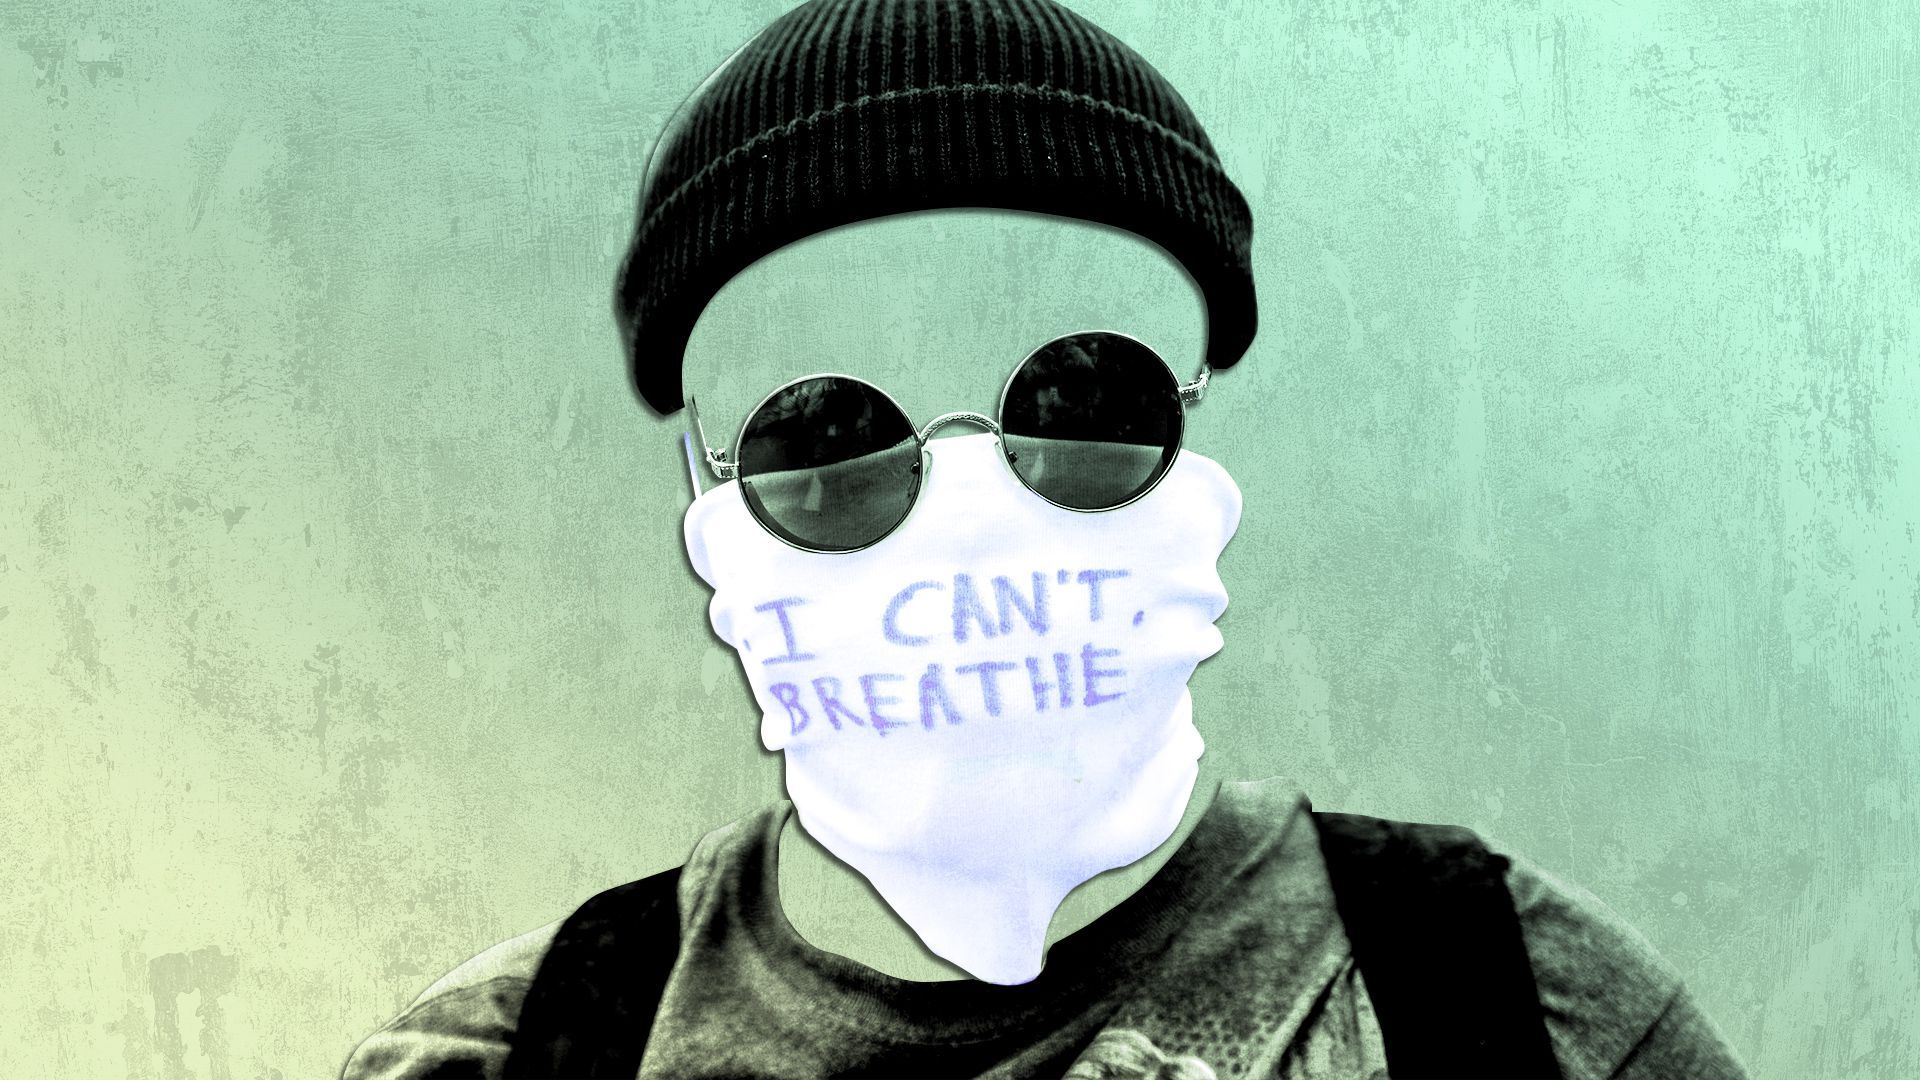 Photo illustration of a protester wearing a mask that says, "I can't breathe."